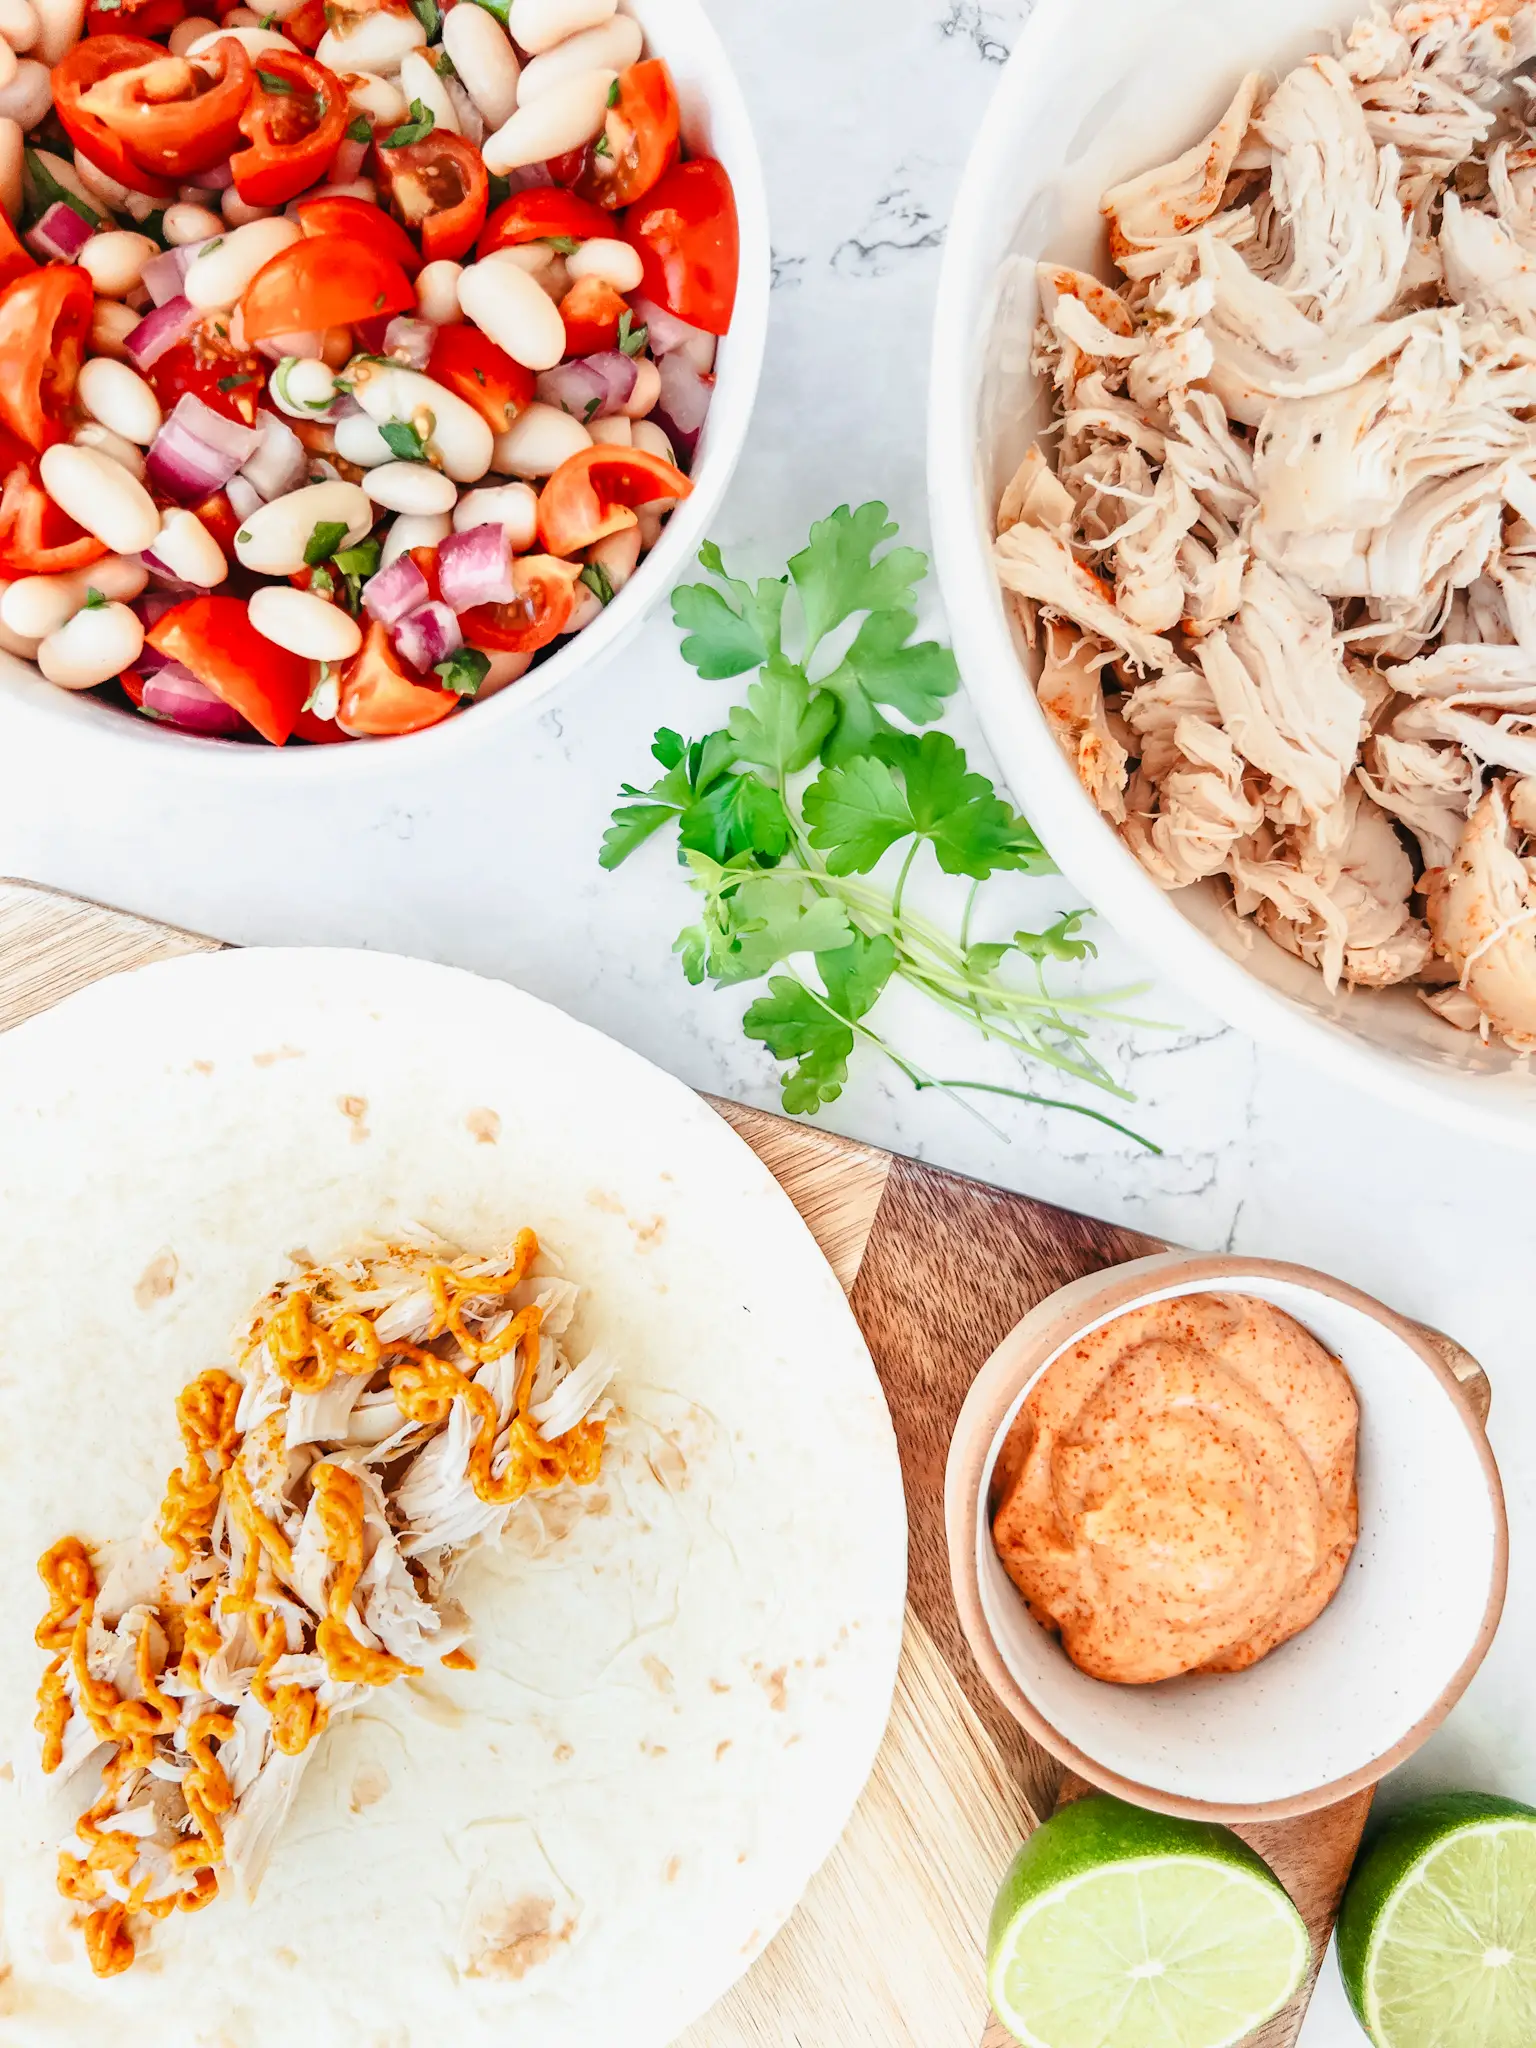 Chicken Wraps with Marinated Tomato Salad